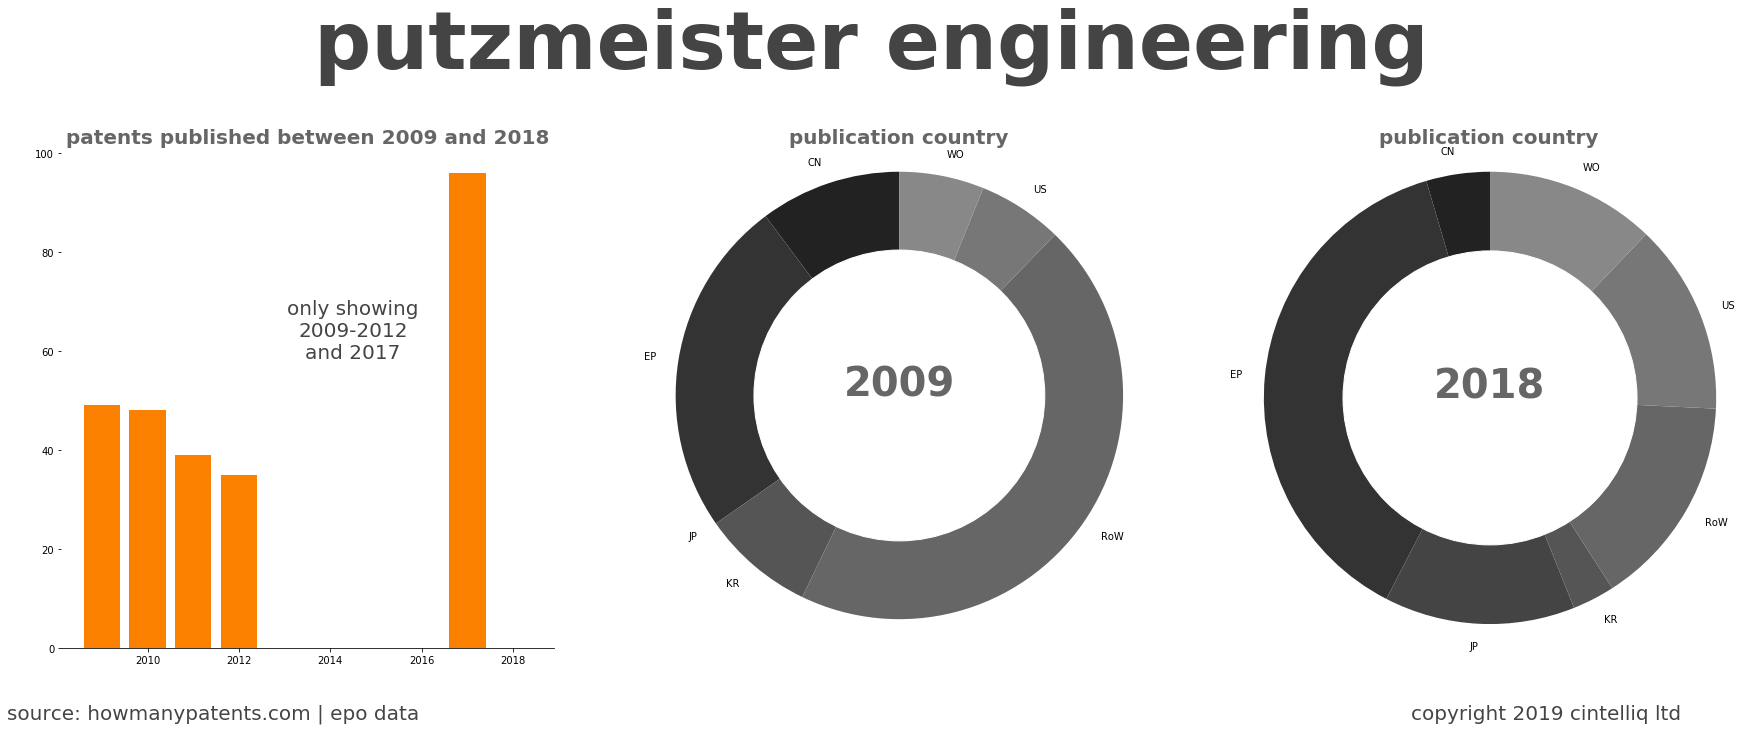 summary of patents for Putzmeister Engineering